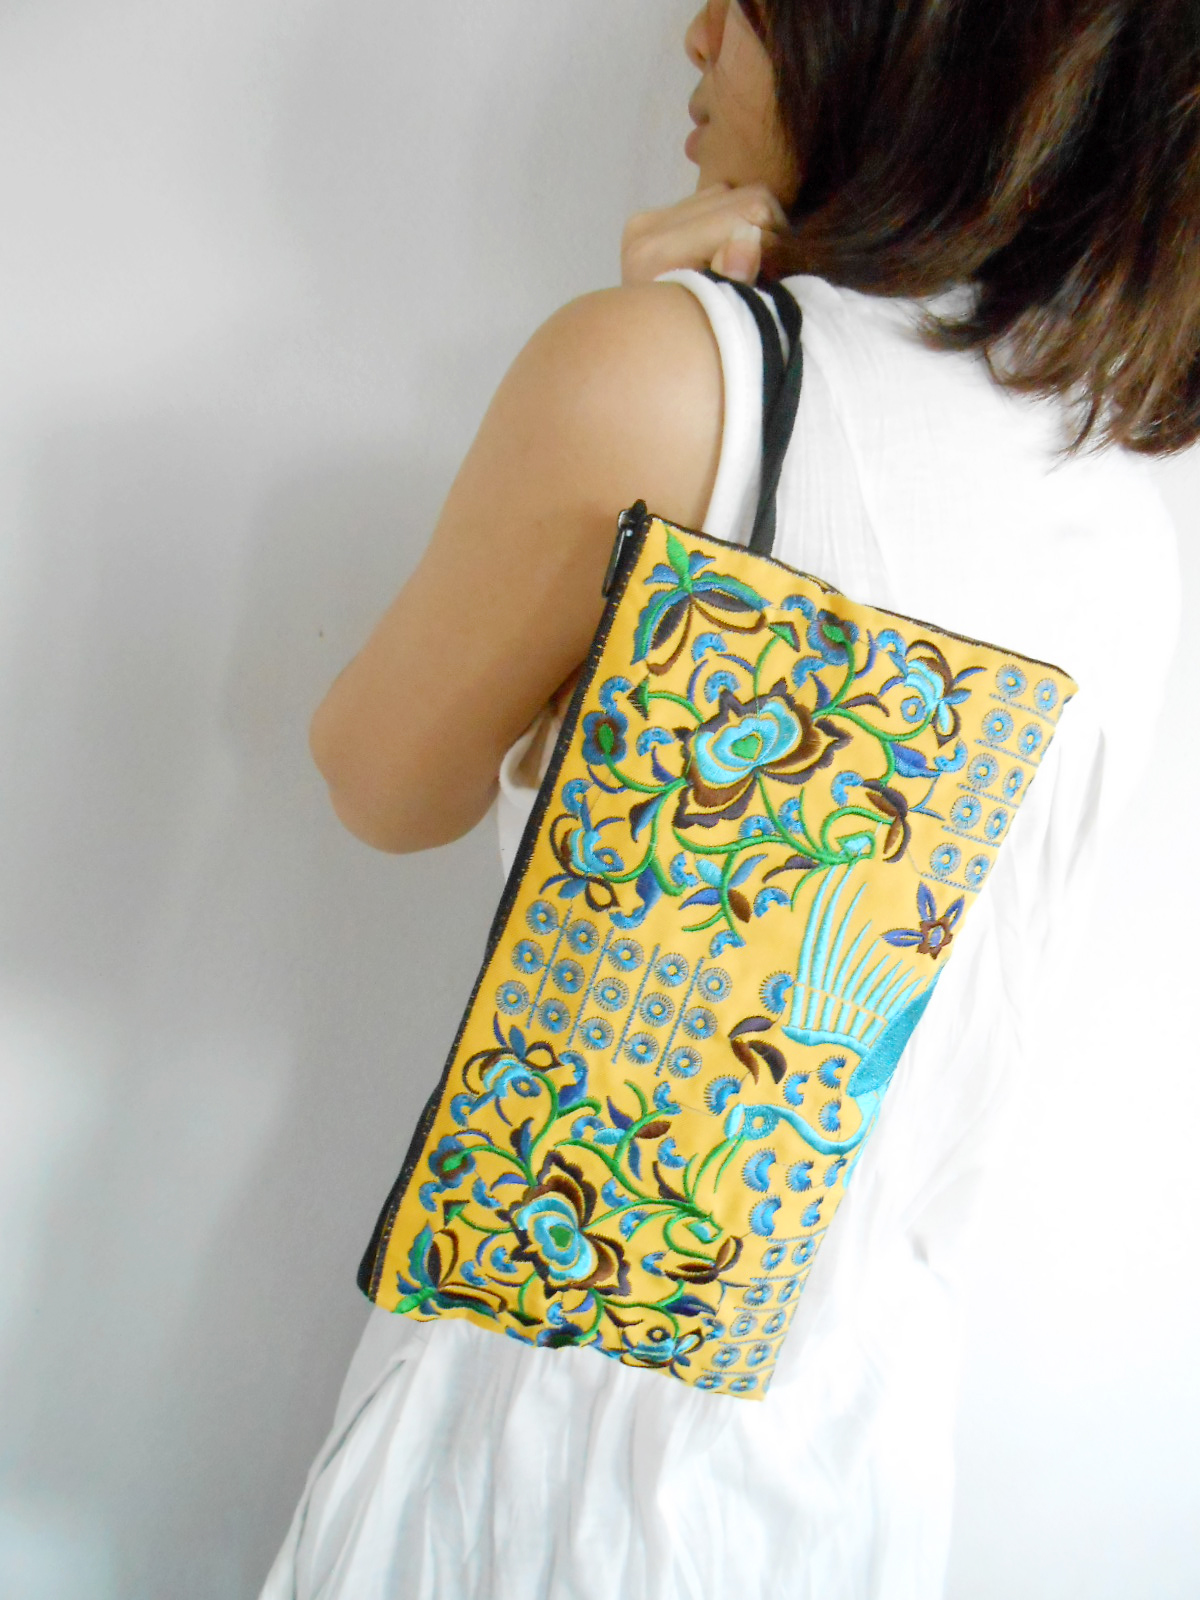 Blue Flamingo Embroidered Clutch Bag, W/ Yellow Fabric Chinese Hmong Hilltribe Handmade In Thailand. (kp1056-blye)